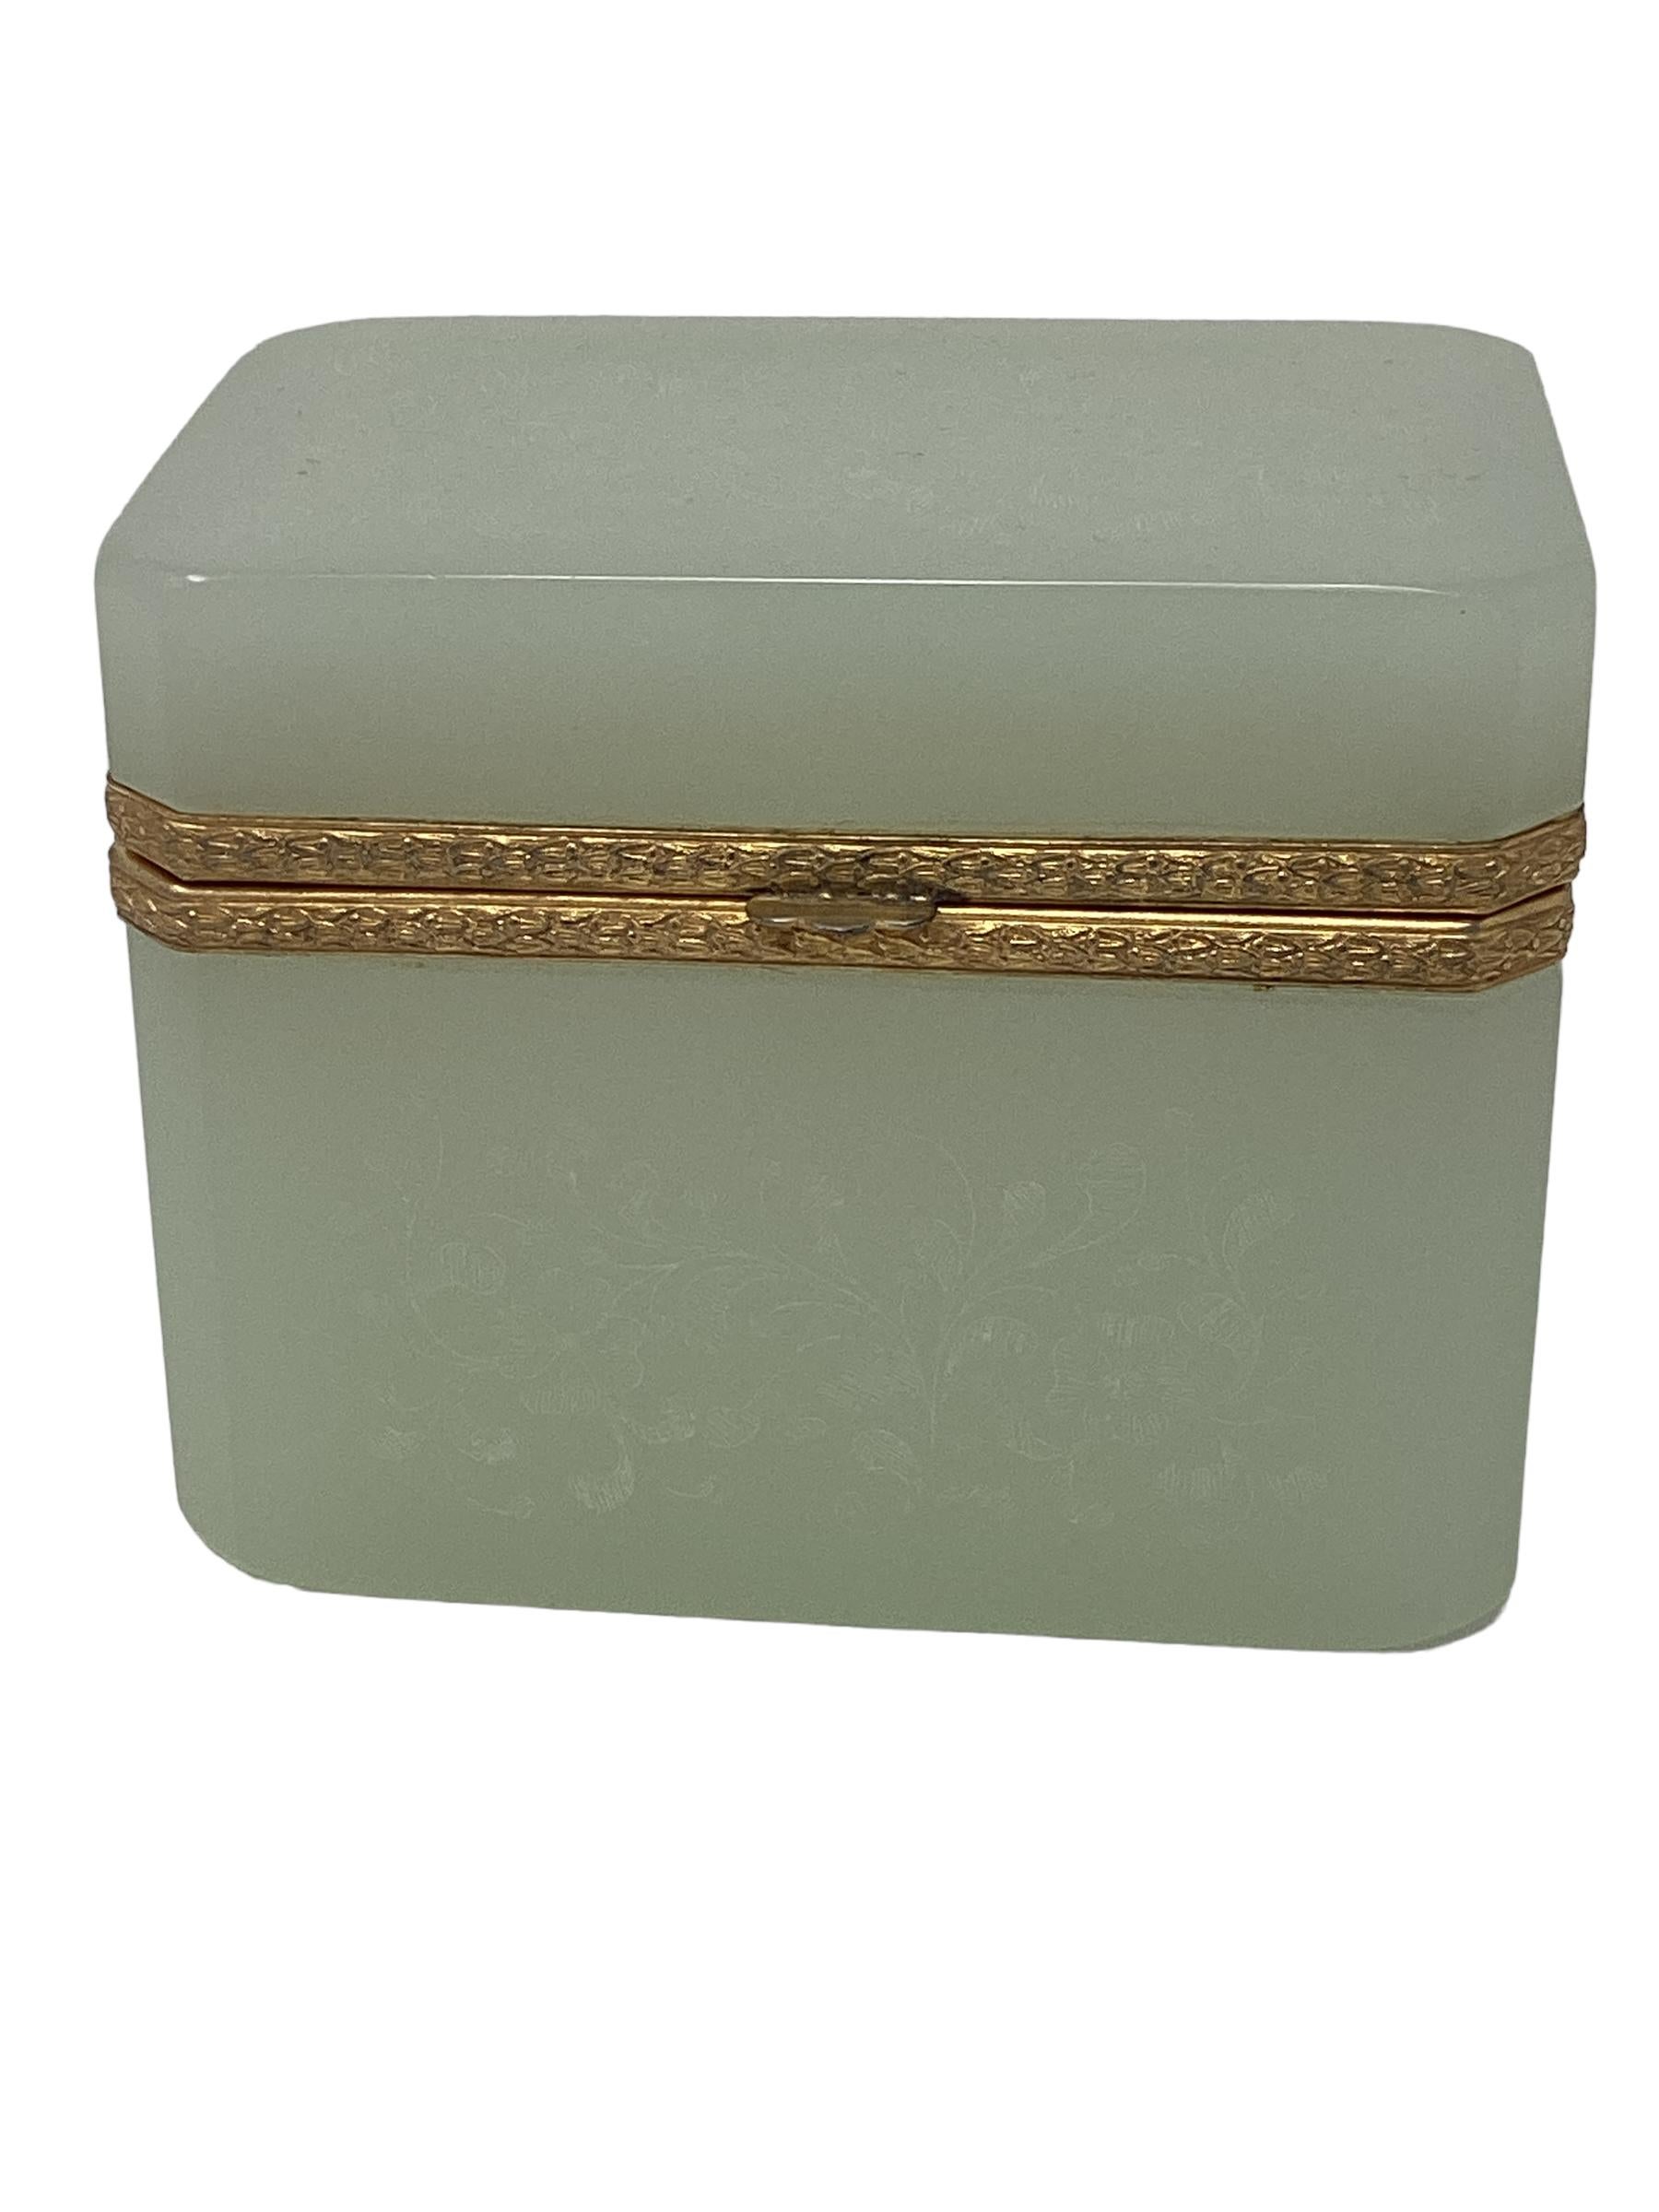 Antique French Green Opaline Box with Etched Decoration  For Sale 2